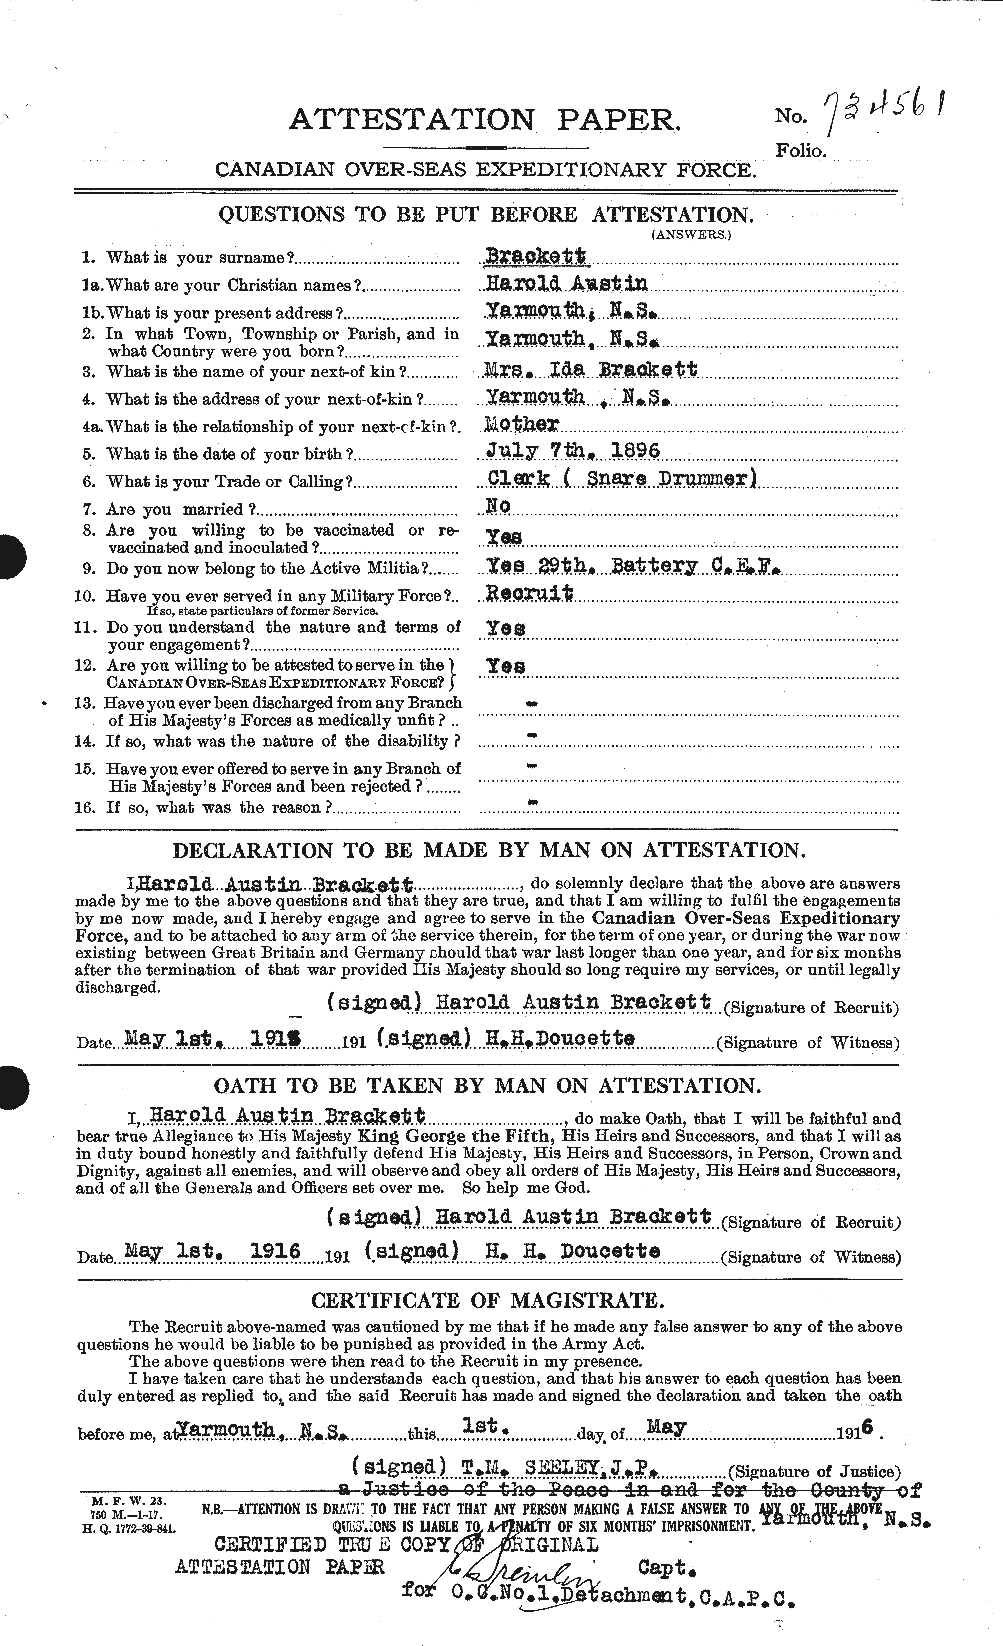 Personnel Records of the First World War - CEF 254733a